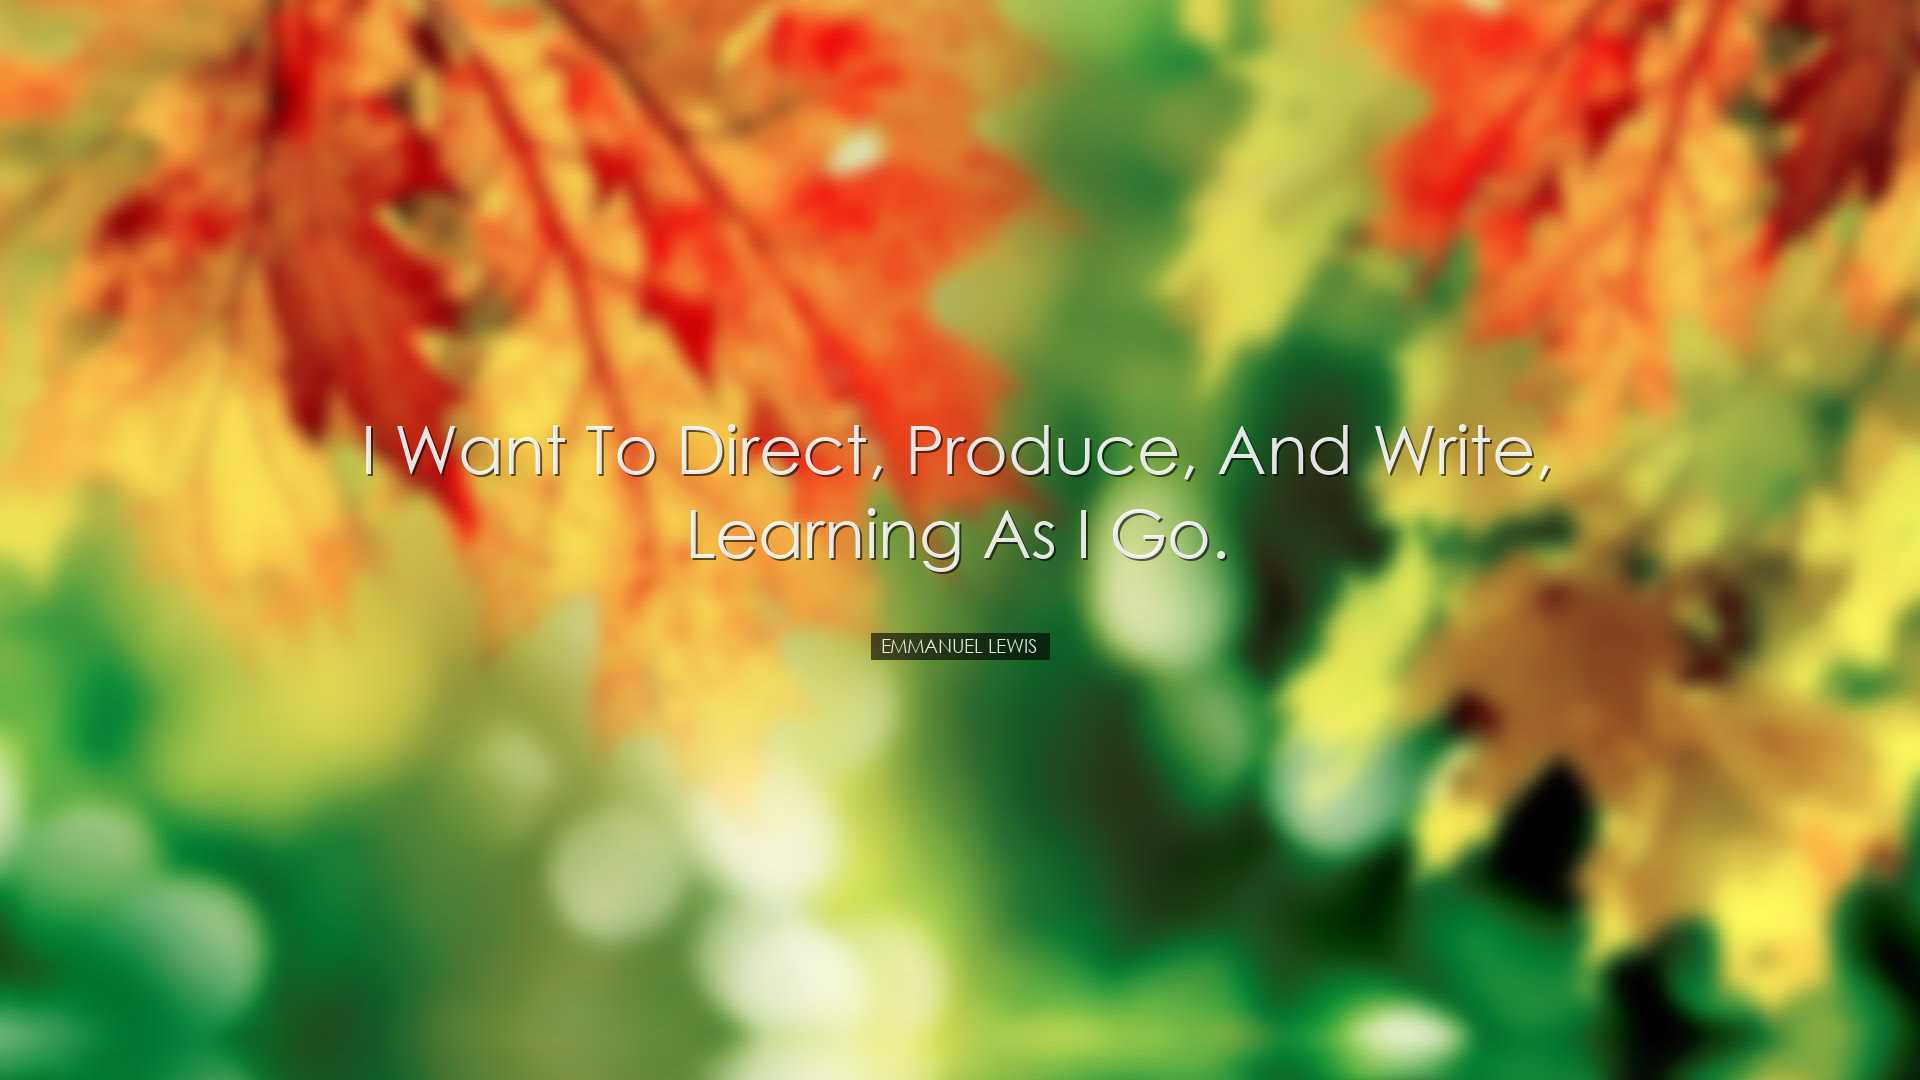 I want to direct, produce, and write, learning as I go. - Emmanuel